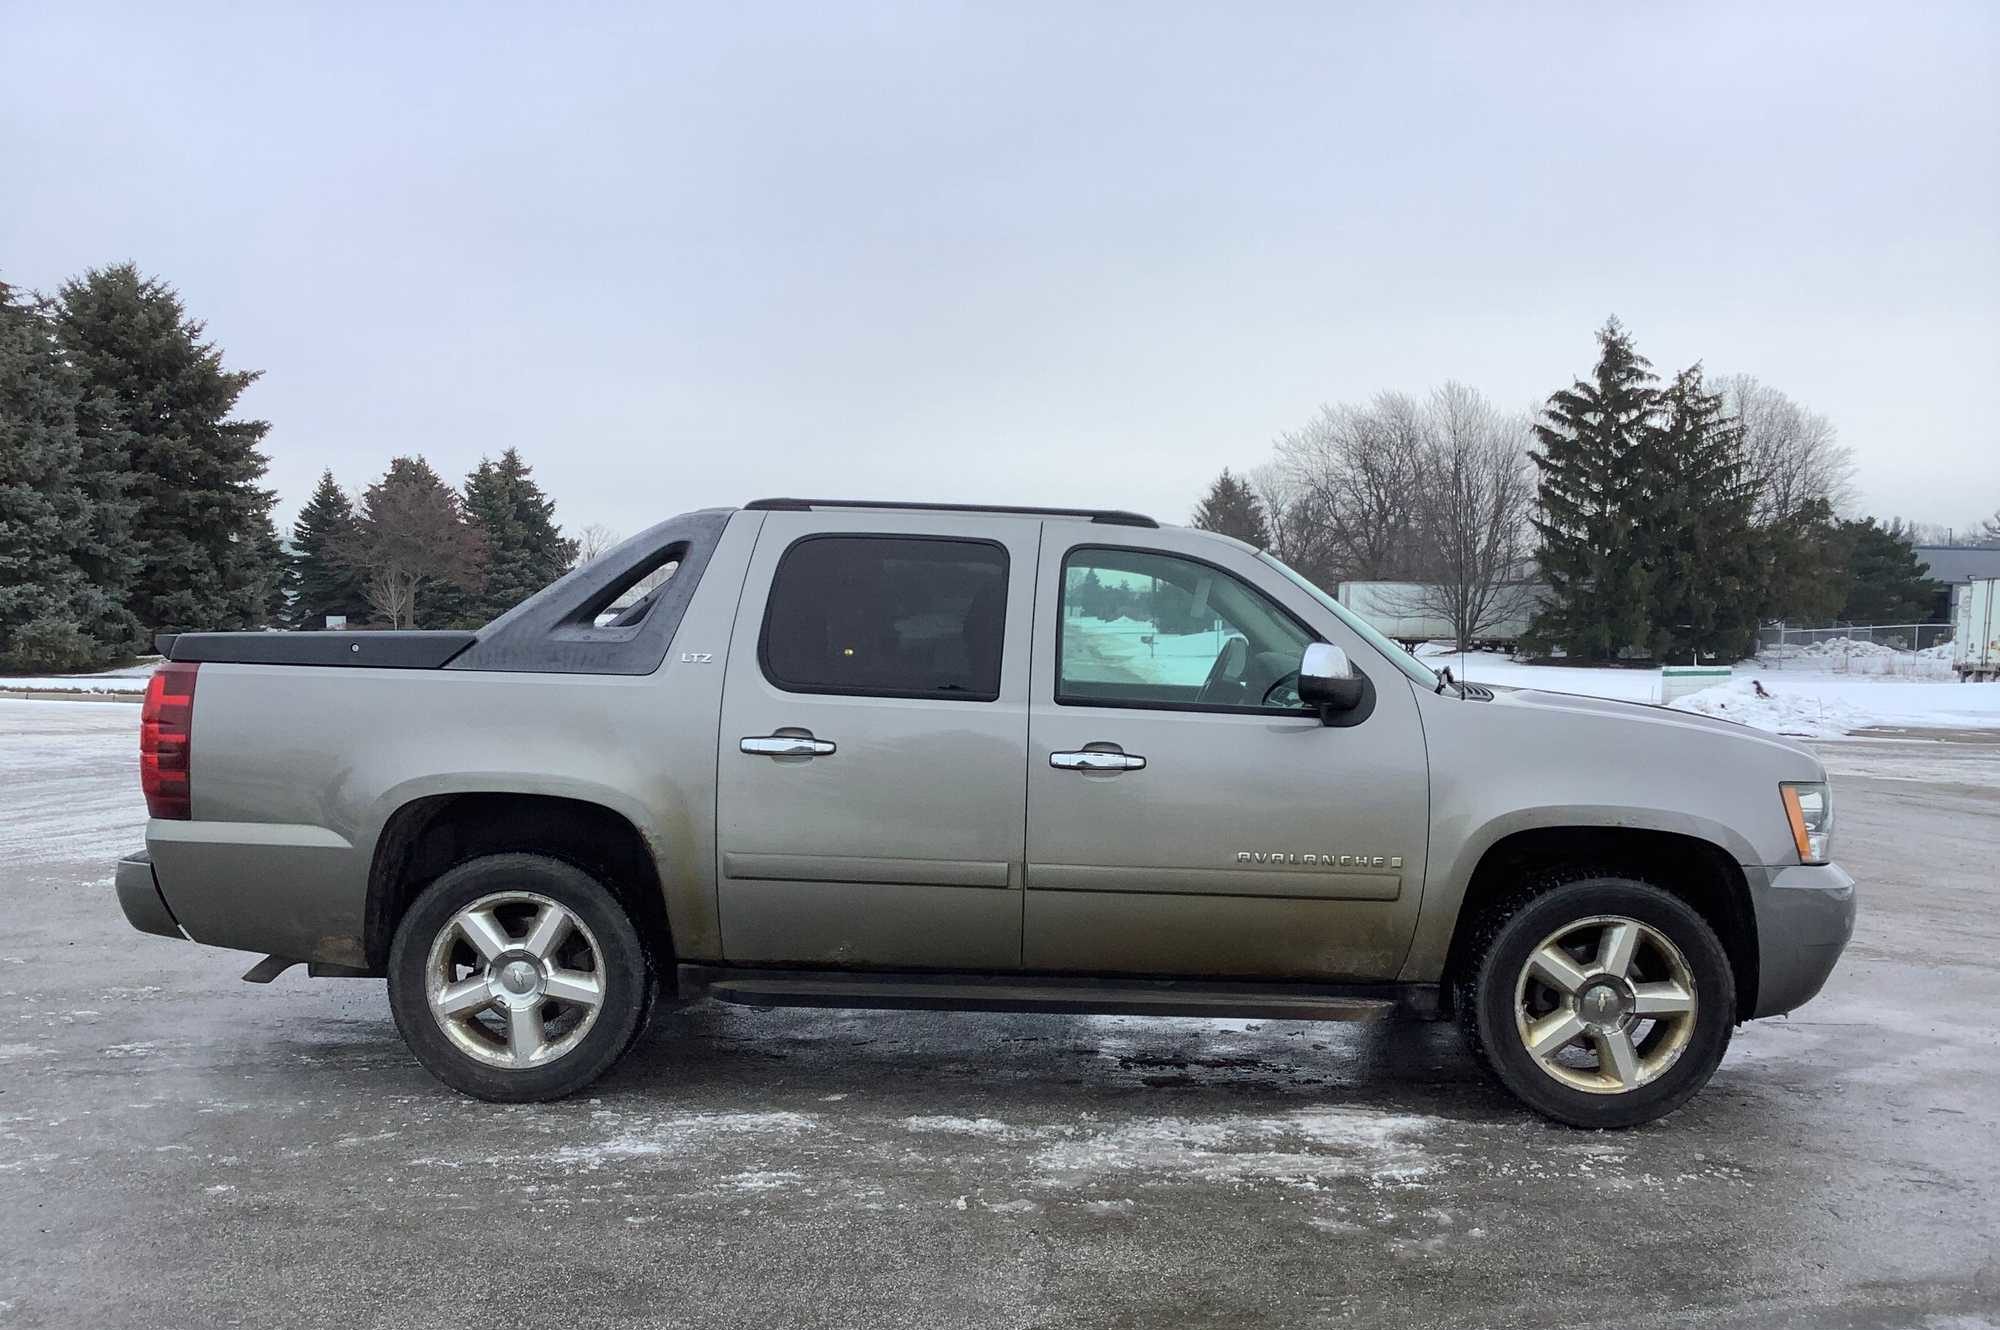 2008 Chevrolet Avalanche 4WD Sport Utility 4-DR